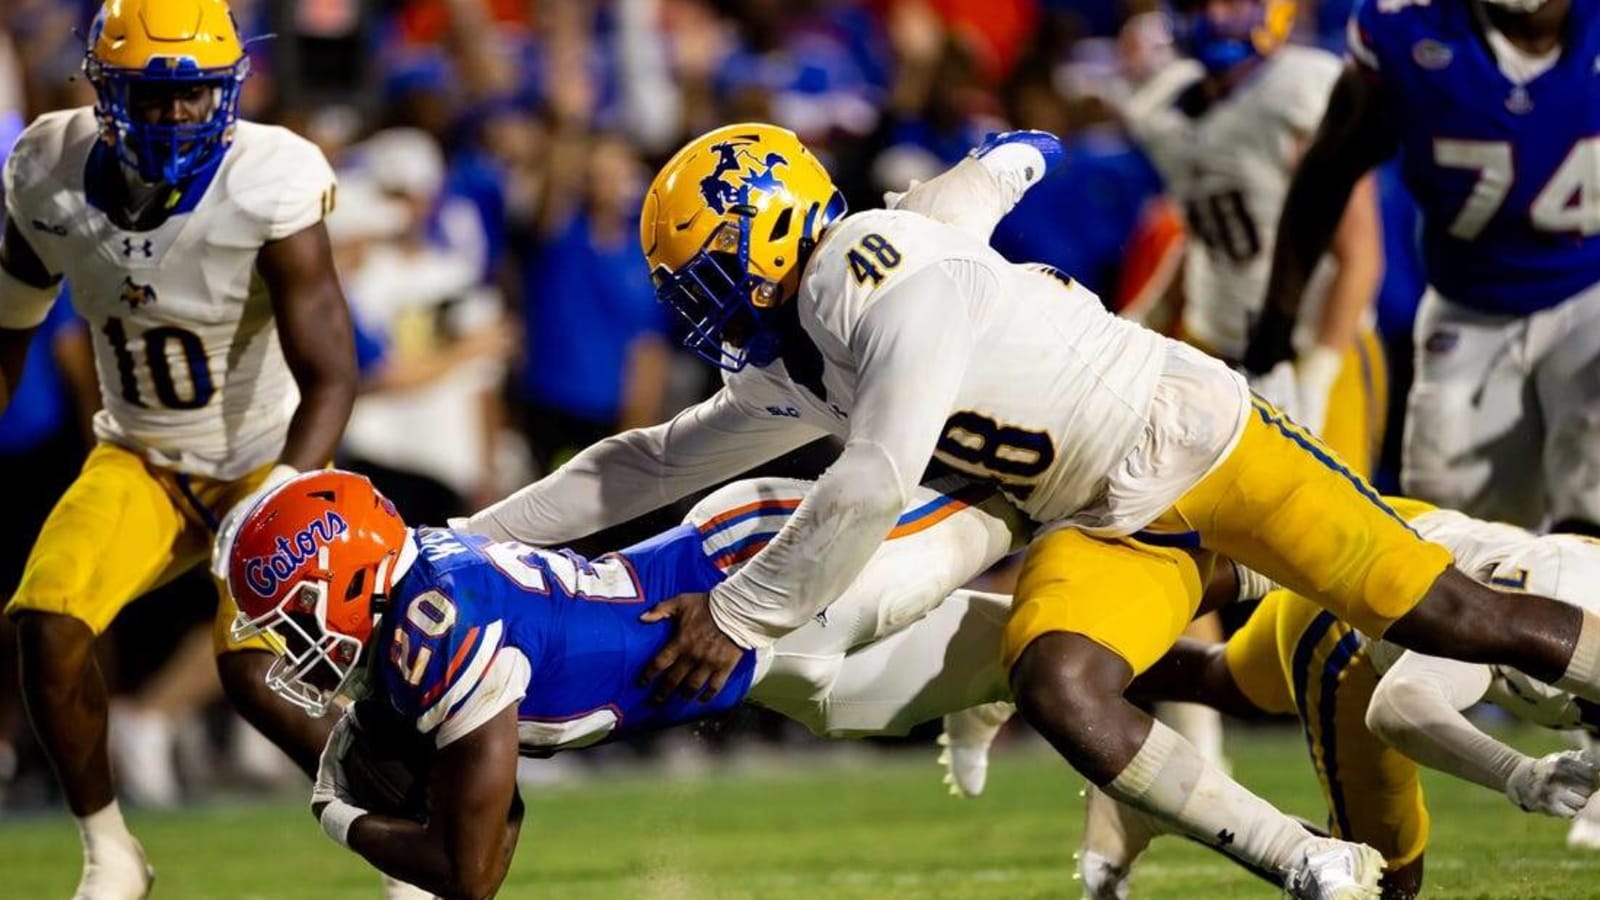 Florida nearly unstoppable in trouncing McNeese